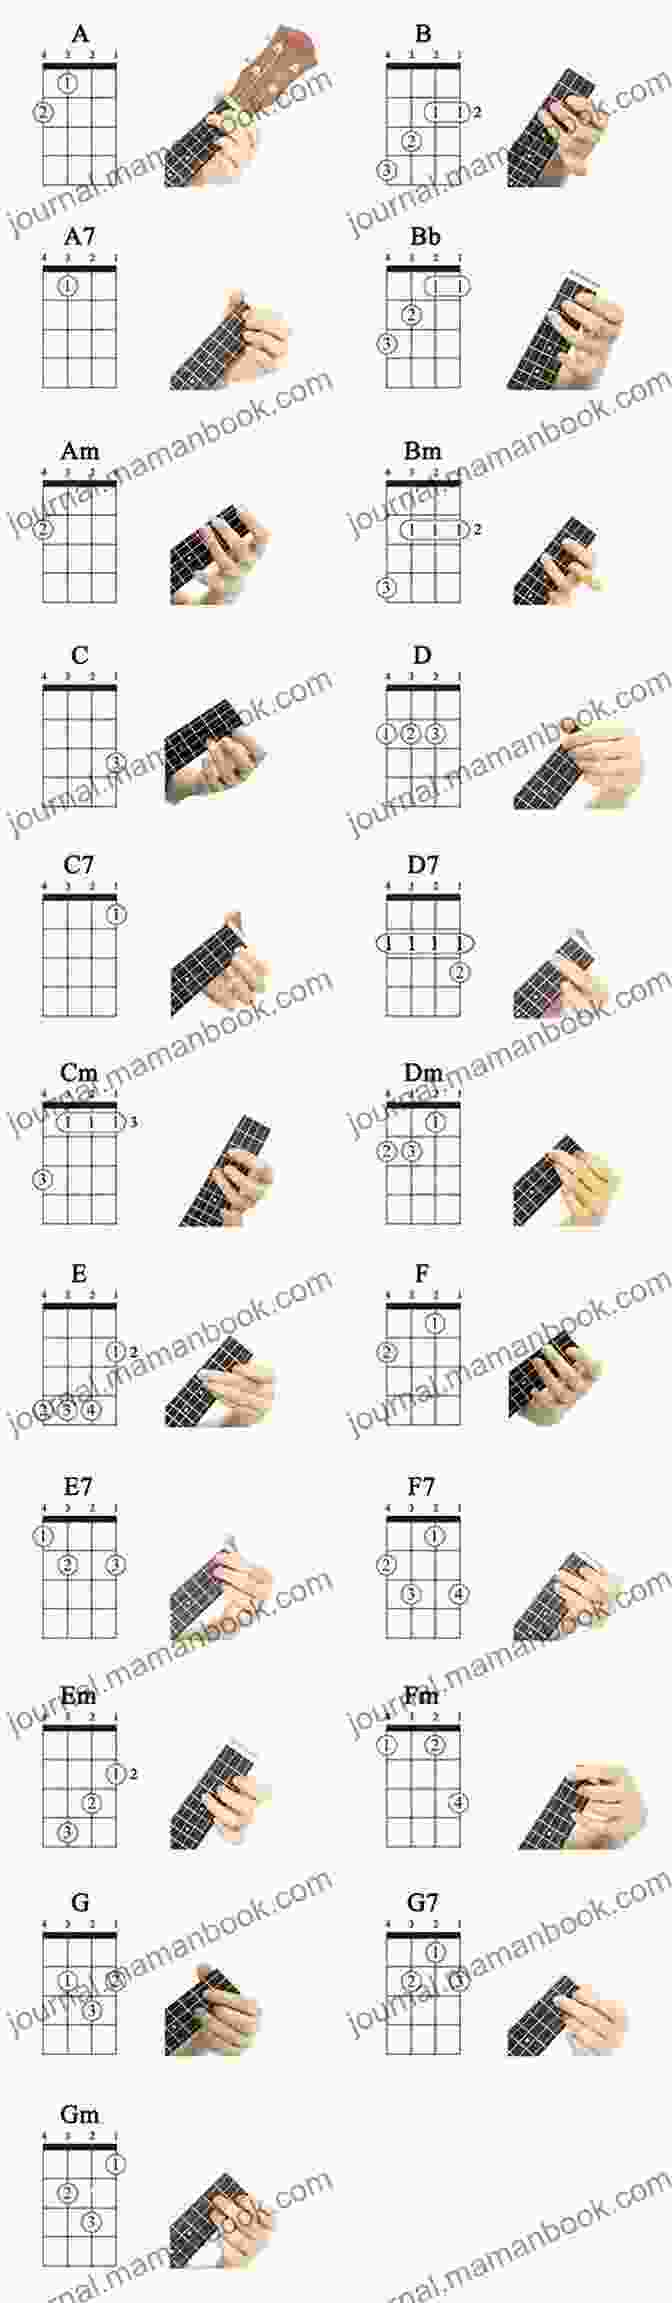 Ukulele Chords For 26 Easy Ukulele Christmas Songs : Simple Ukulele Chords For Beginners Cute Music Xmas Gift For Kids And Adults Santa Claus Cover Journal